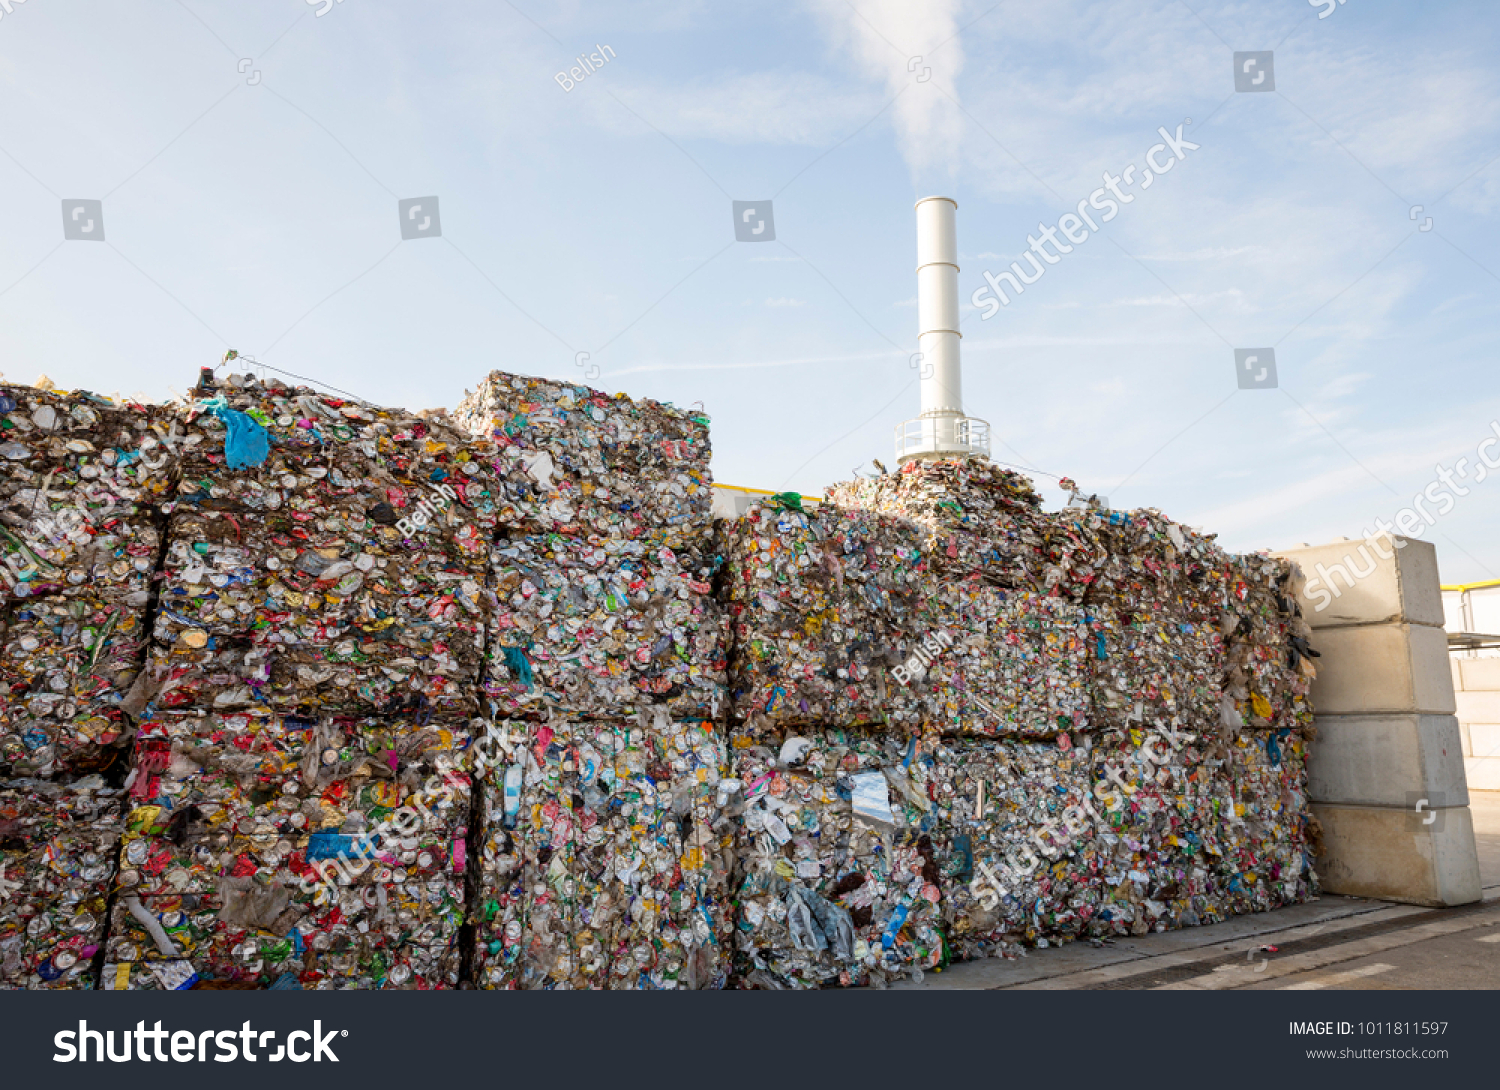 Waste-to-energy or energy-from-waste is the process of generating energy in the form of electricity or heat from the primary treatment of waste. Cubes of pressed metal beer and soda cans. #1011811597